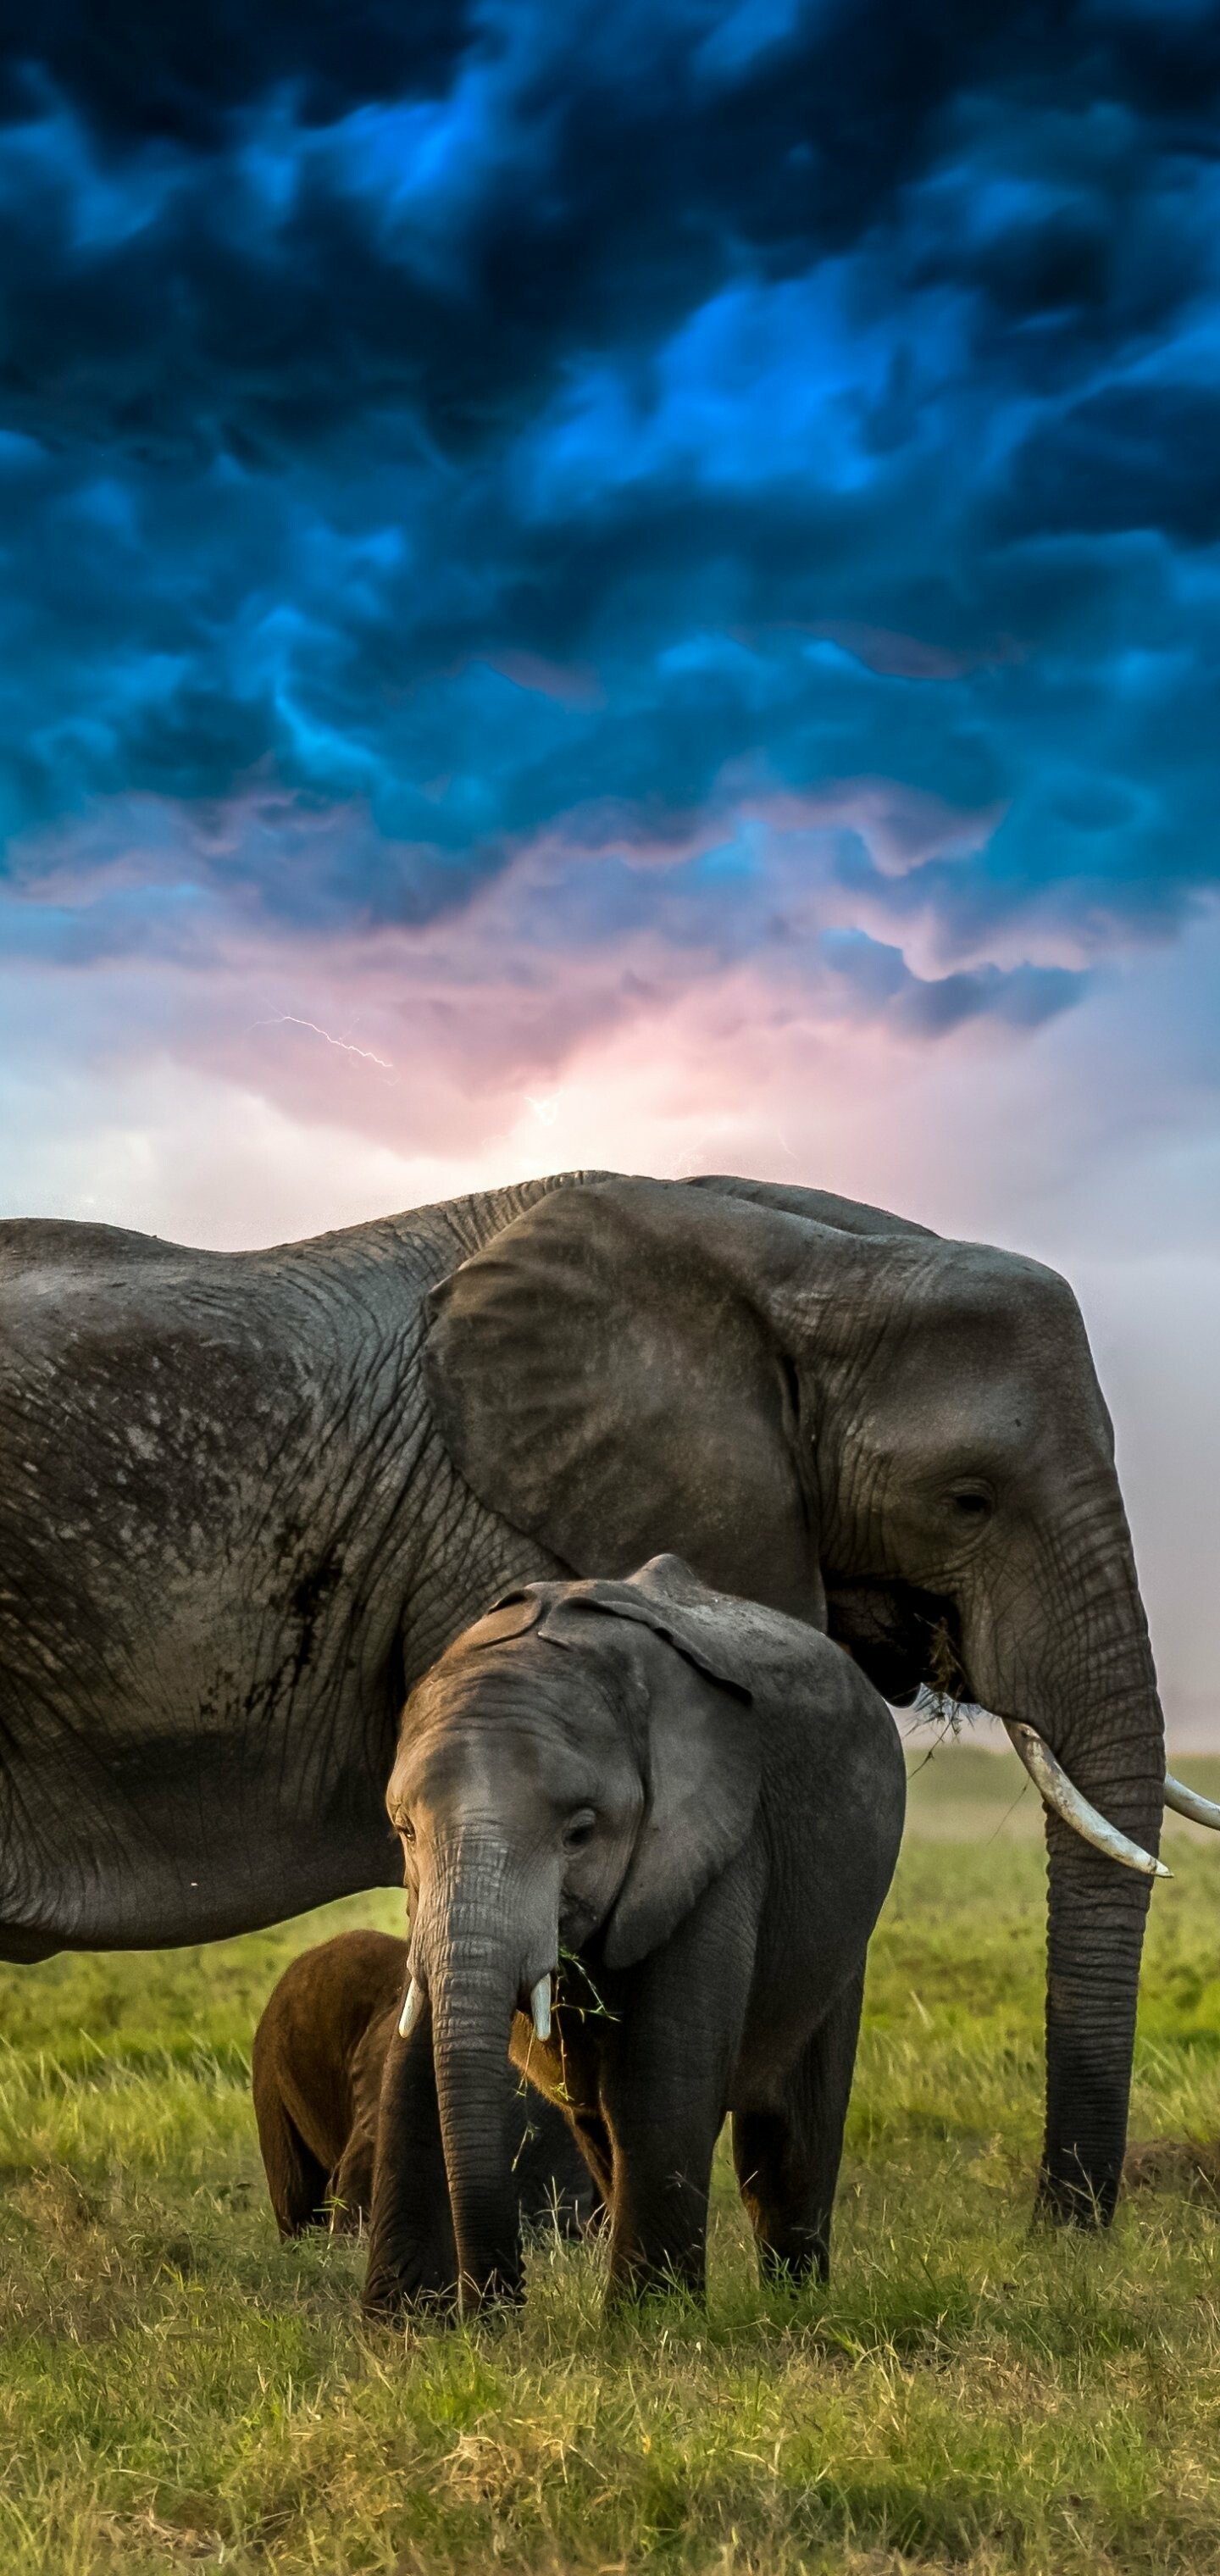 Elephant: They are considered to be keystone species, due to their impact on their environments. 1440x3040 HD Wallpaper.